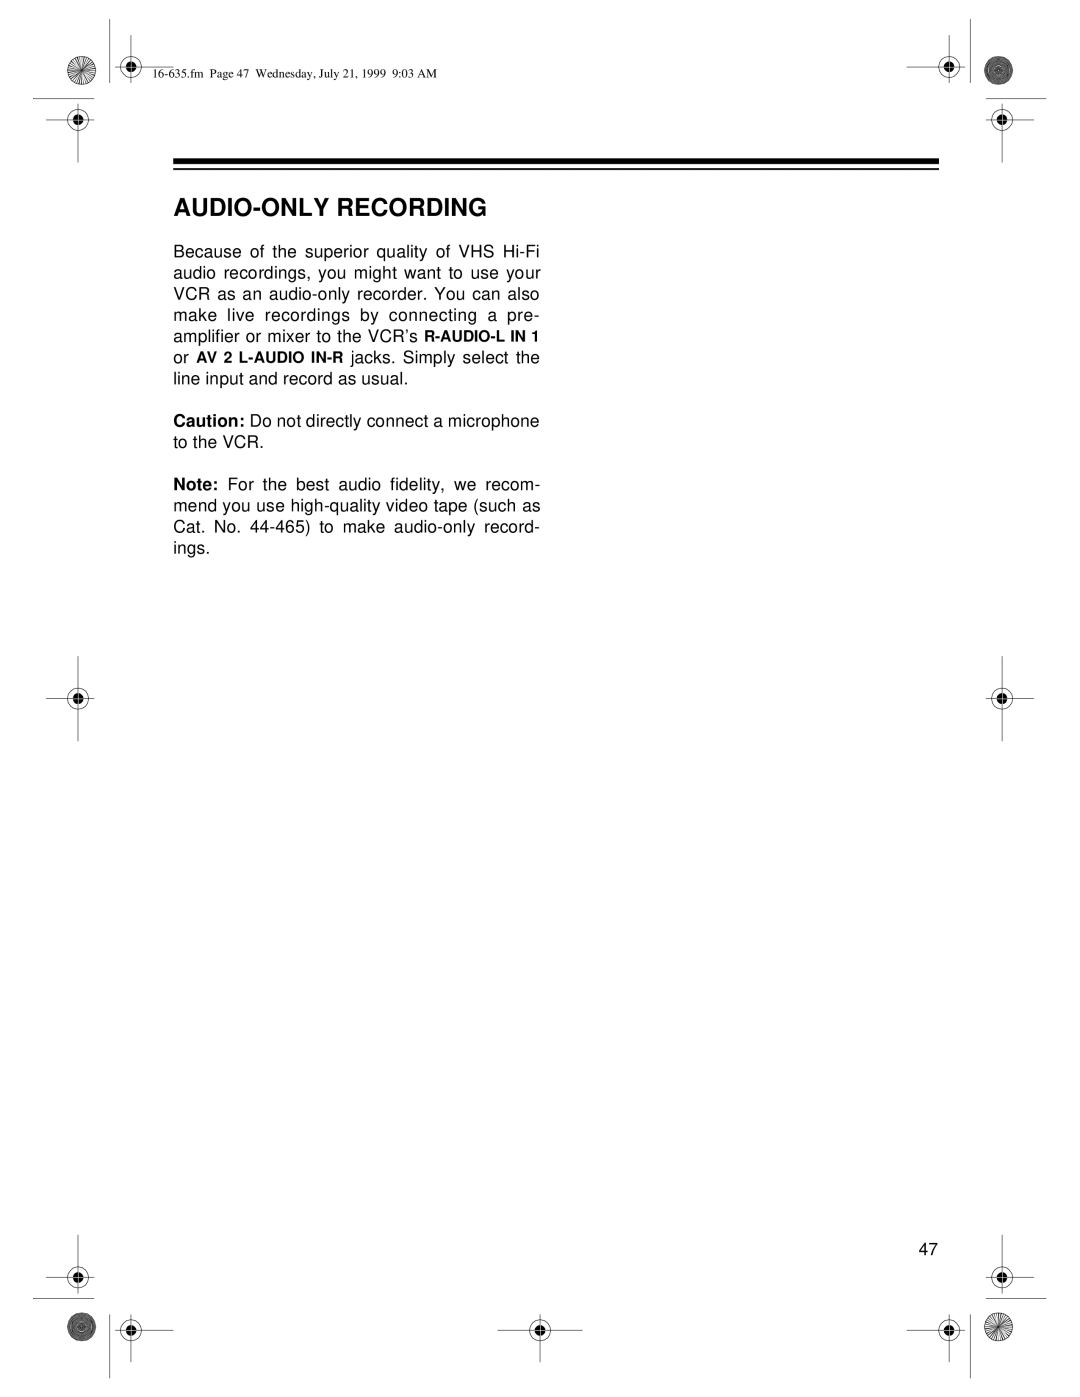 Radio Shack 66 owner manual Audio-Only Recording 